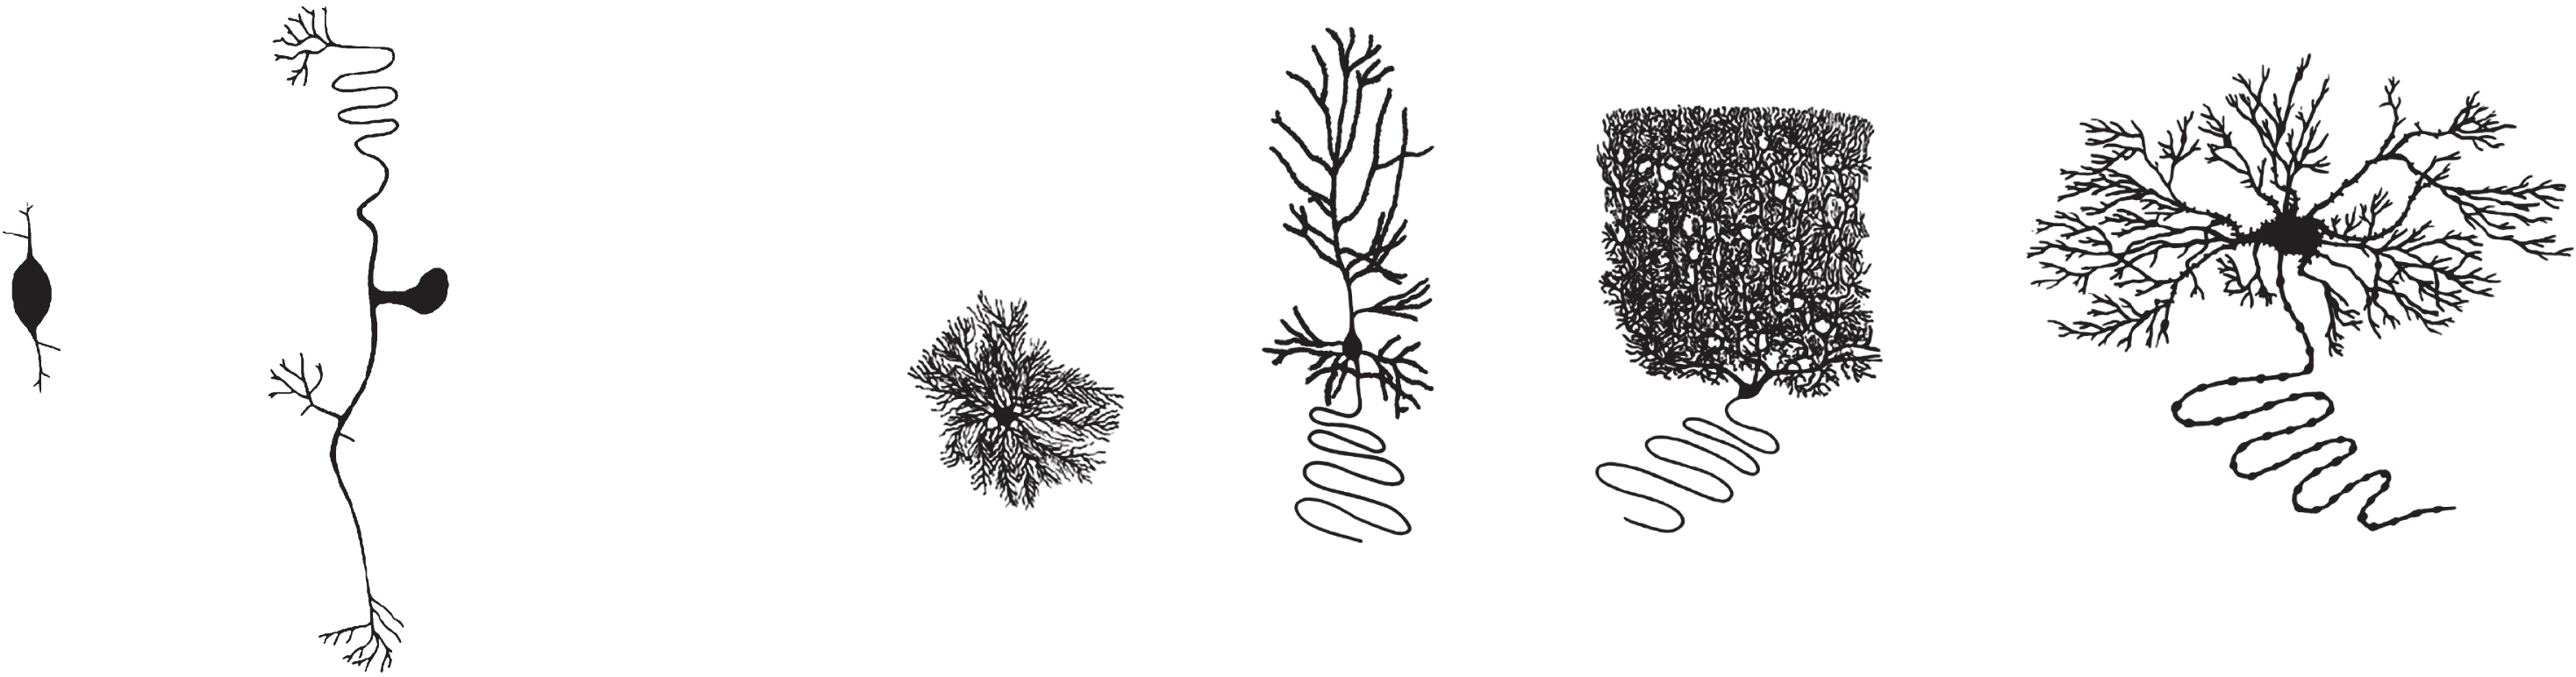 Various neurons with different composition. The first neuron has one short dendrite which hardly branches and one short axon. The second neuron has one long dendrite and one long axon, both branching a little. The third neuron has multiple highly branching dendrites. The fourth neuron has one long unbranching axon and several long branching dendrites. The fifth neuron has one long unbranching axon and multiple highly branched dendrites. The sixth neuron has one long unbranched axon and several extensively branched dendrites.